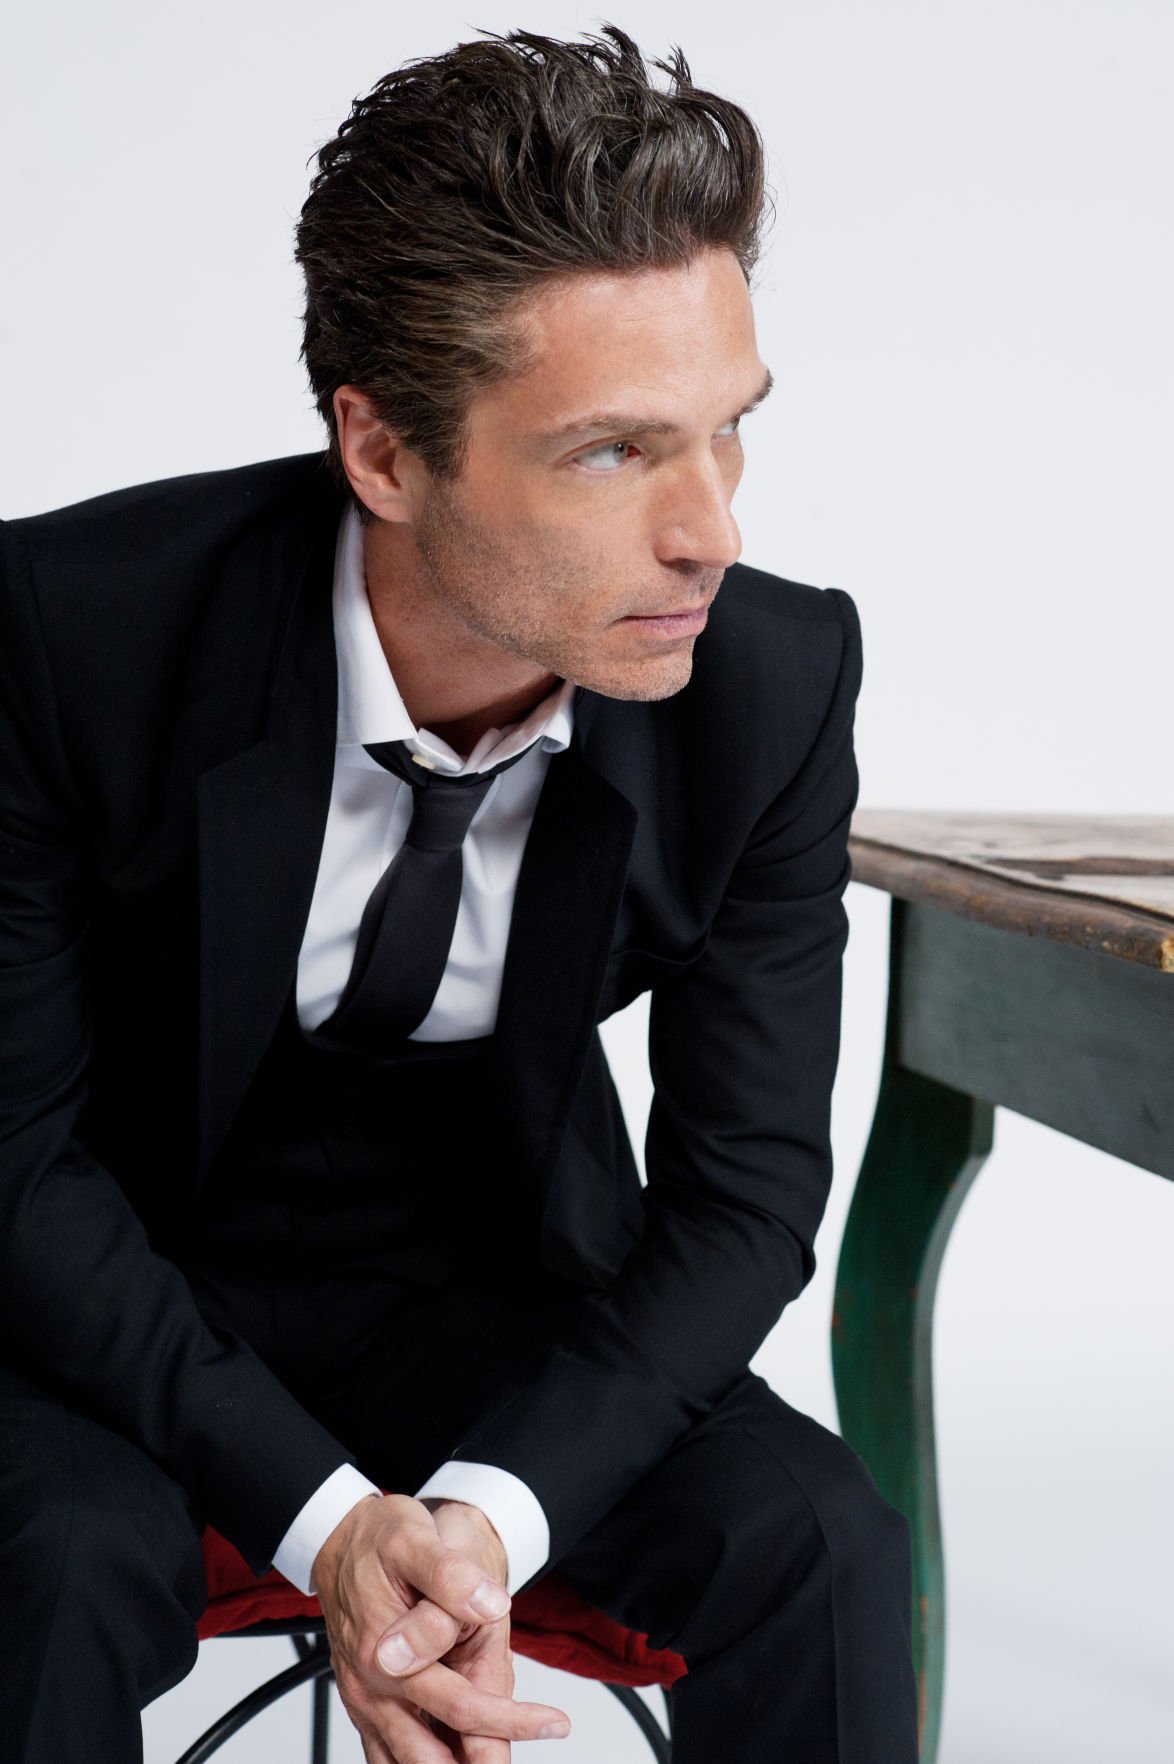 Singer/songwriter Richard Marx to perform at Tachi Palace | Local | hanfordsentinel.com